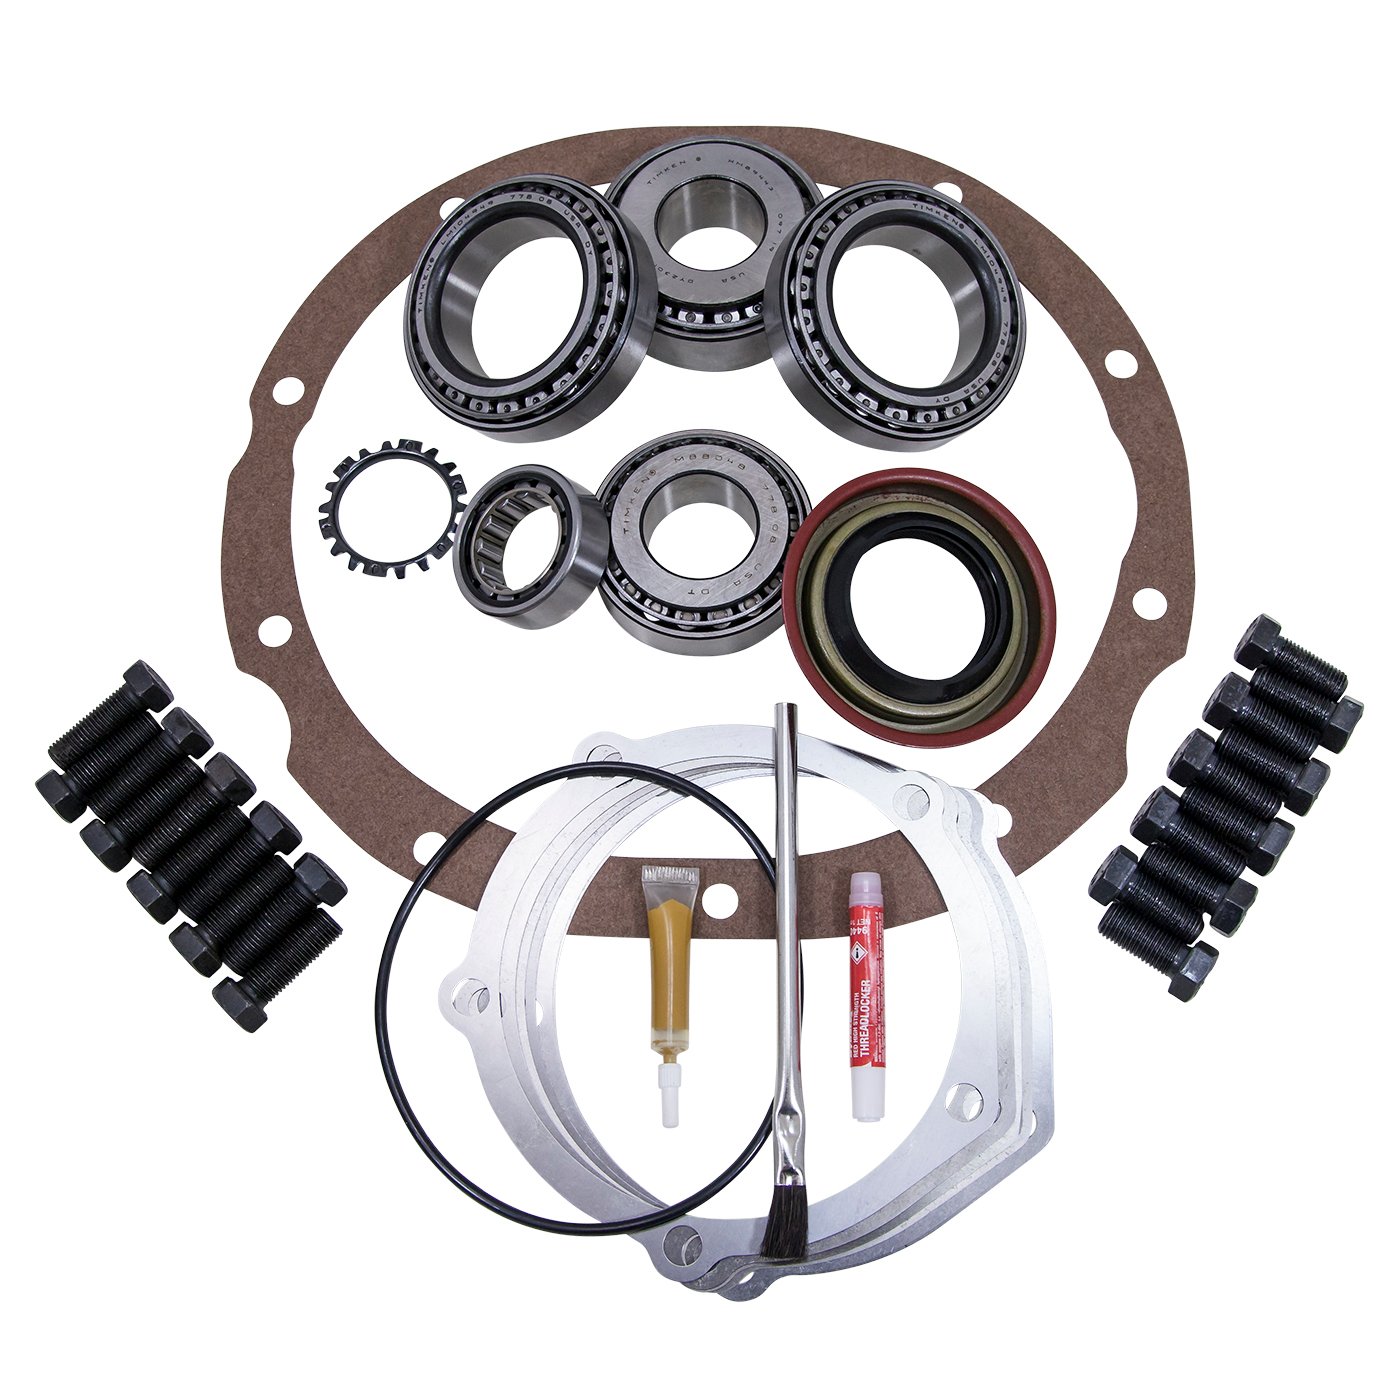 USA Standard ZK F9-A-SPC Master Overhaul Kit, For d 9 in. Lm102910 Differential, W/ Solid Spacer